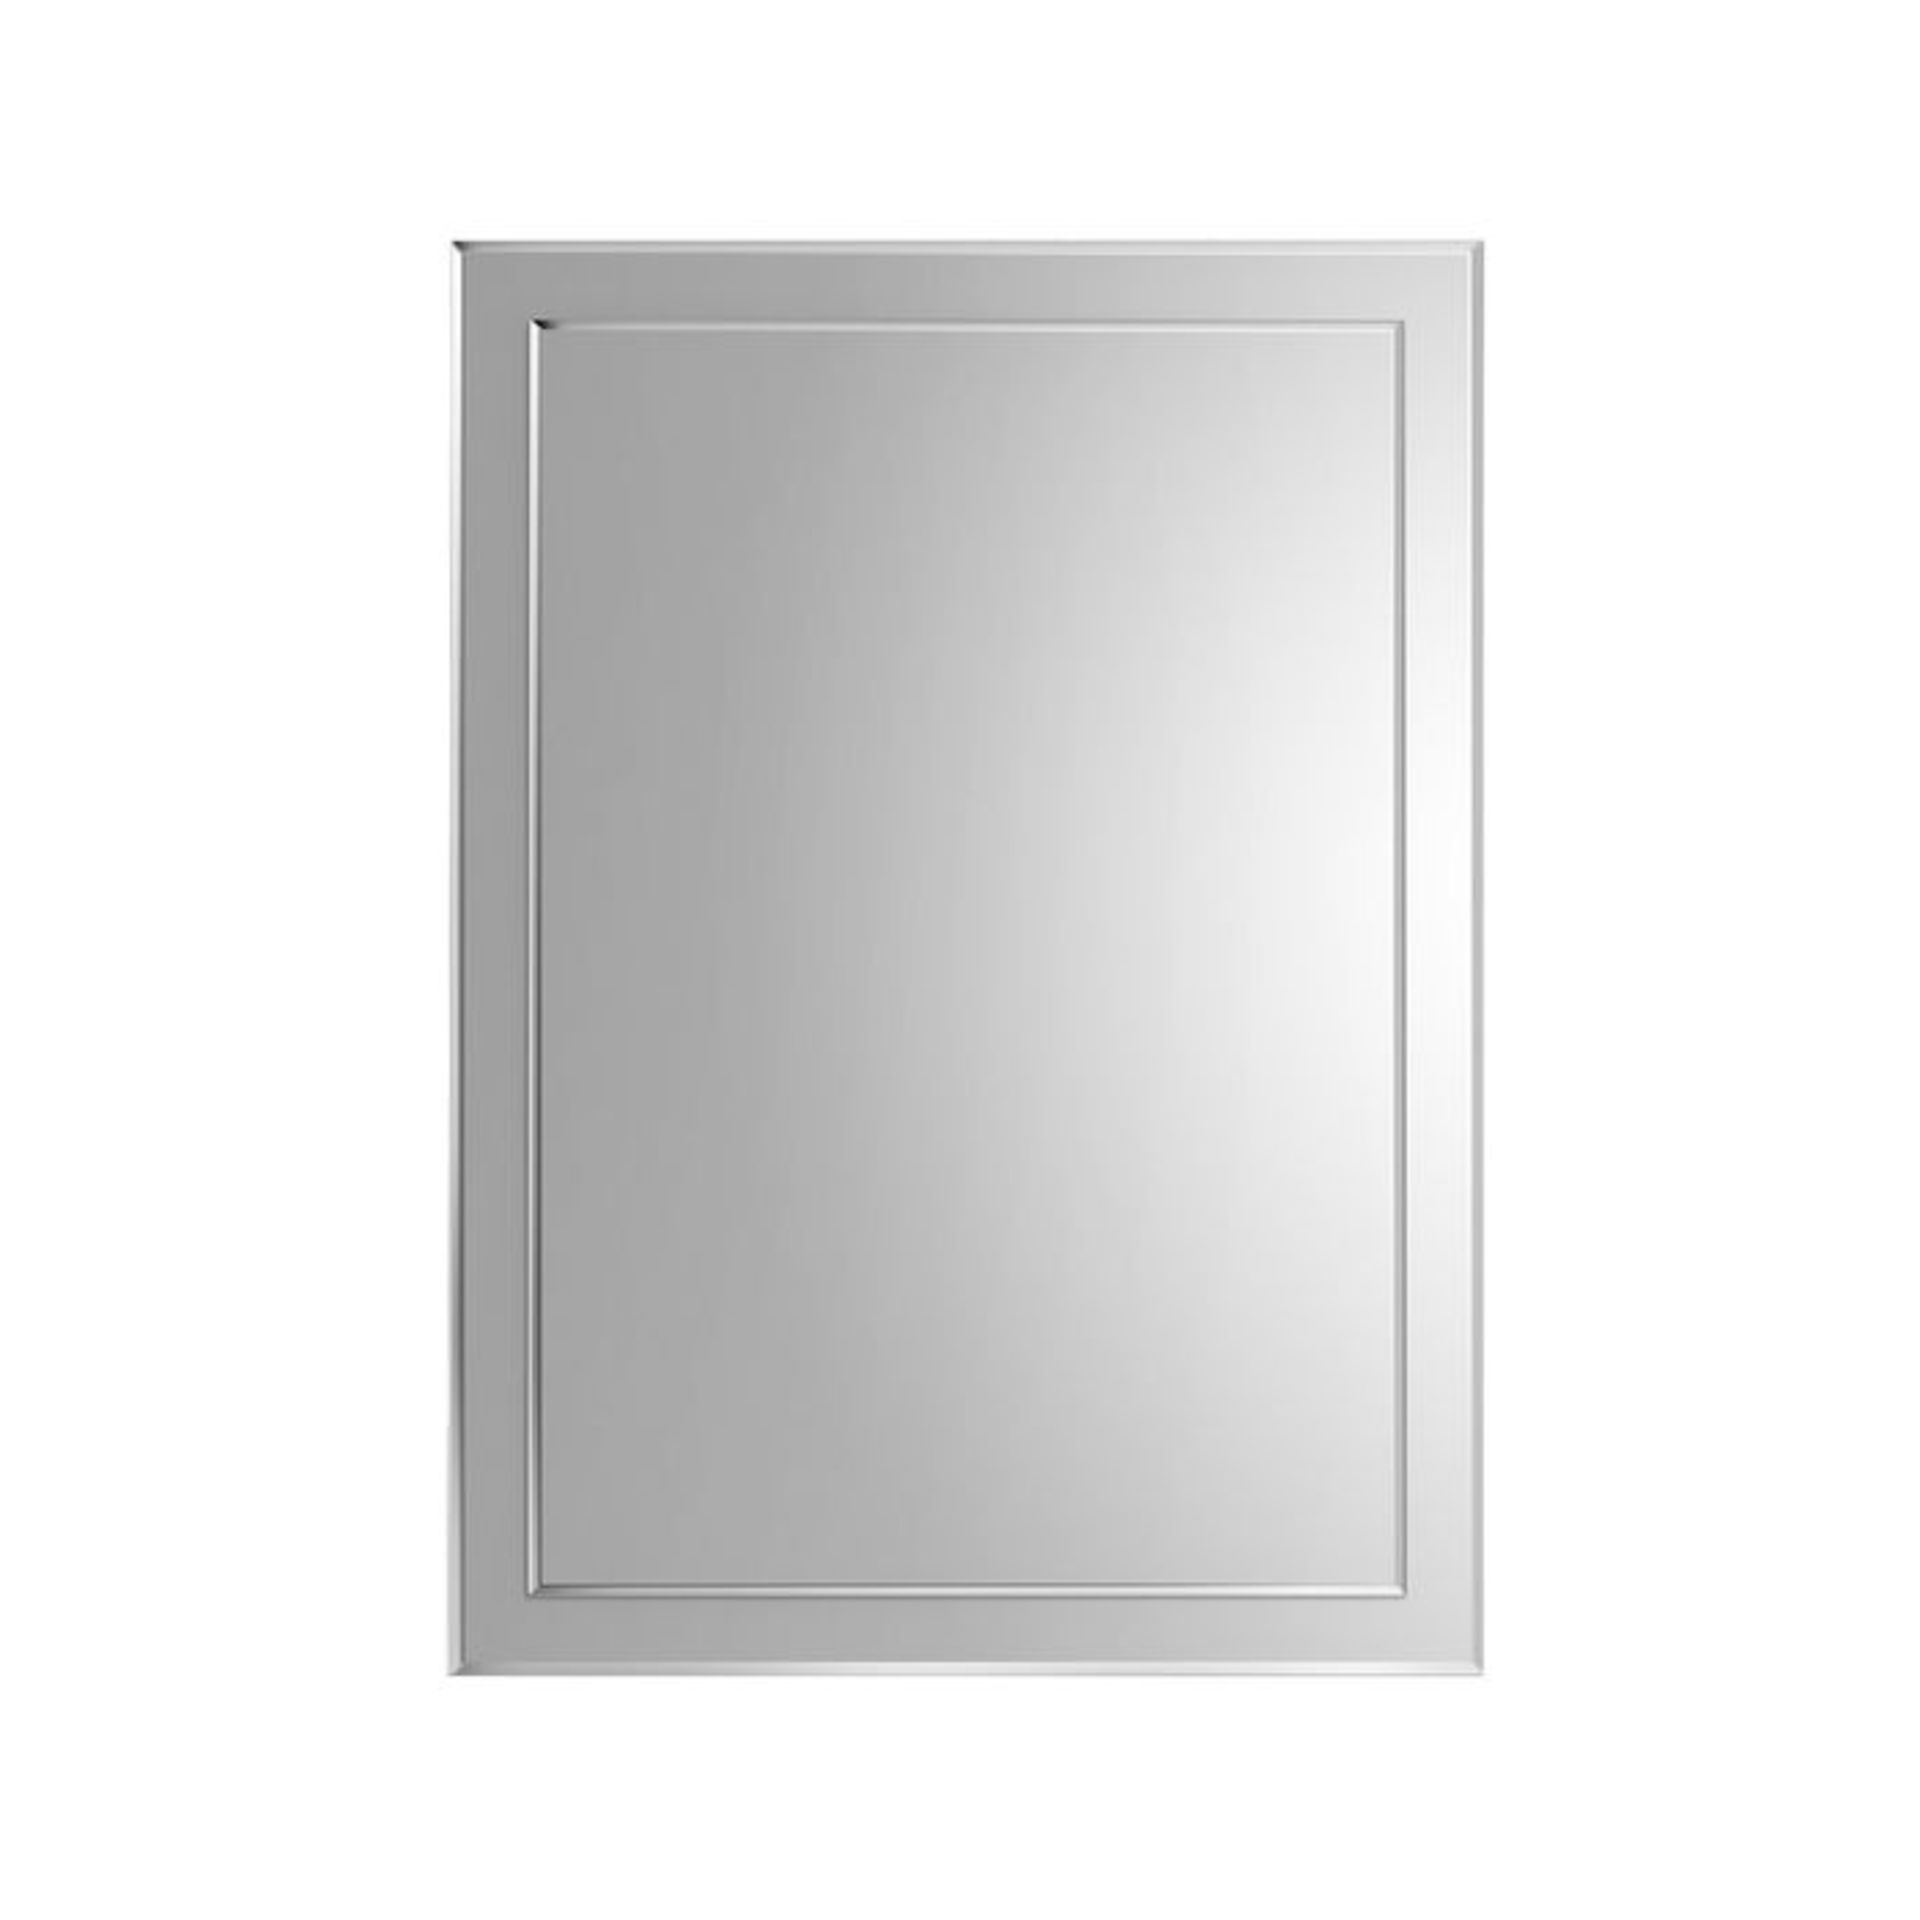 (PT39) 650x900mm Bevel Mirror. Comes fully assembled for added convenience Versatile with a choice - Image 2 of 2